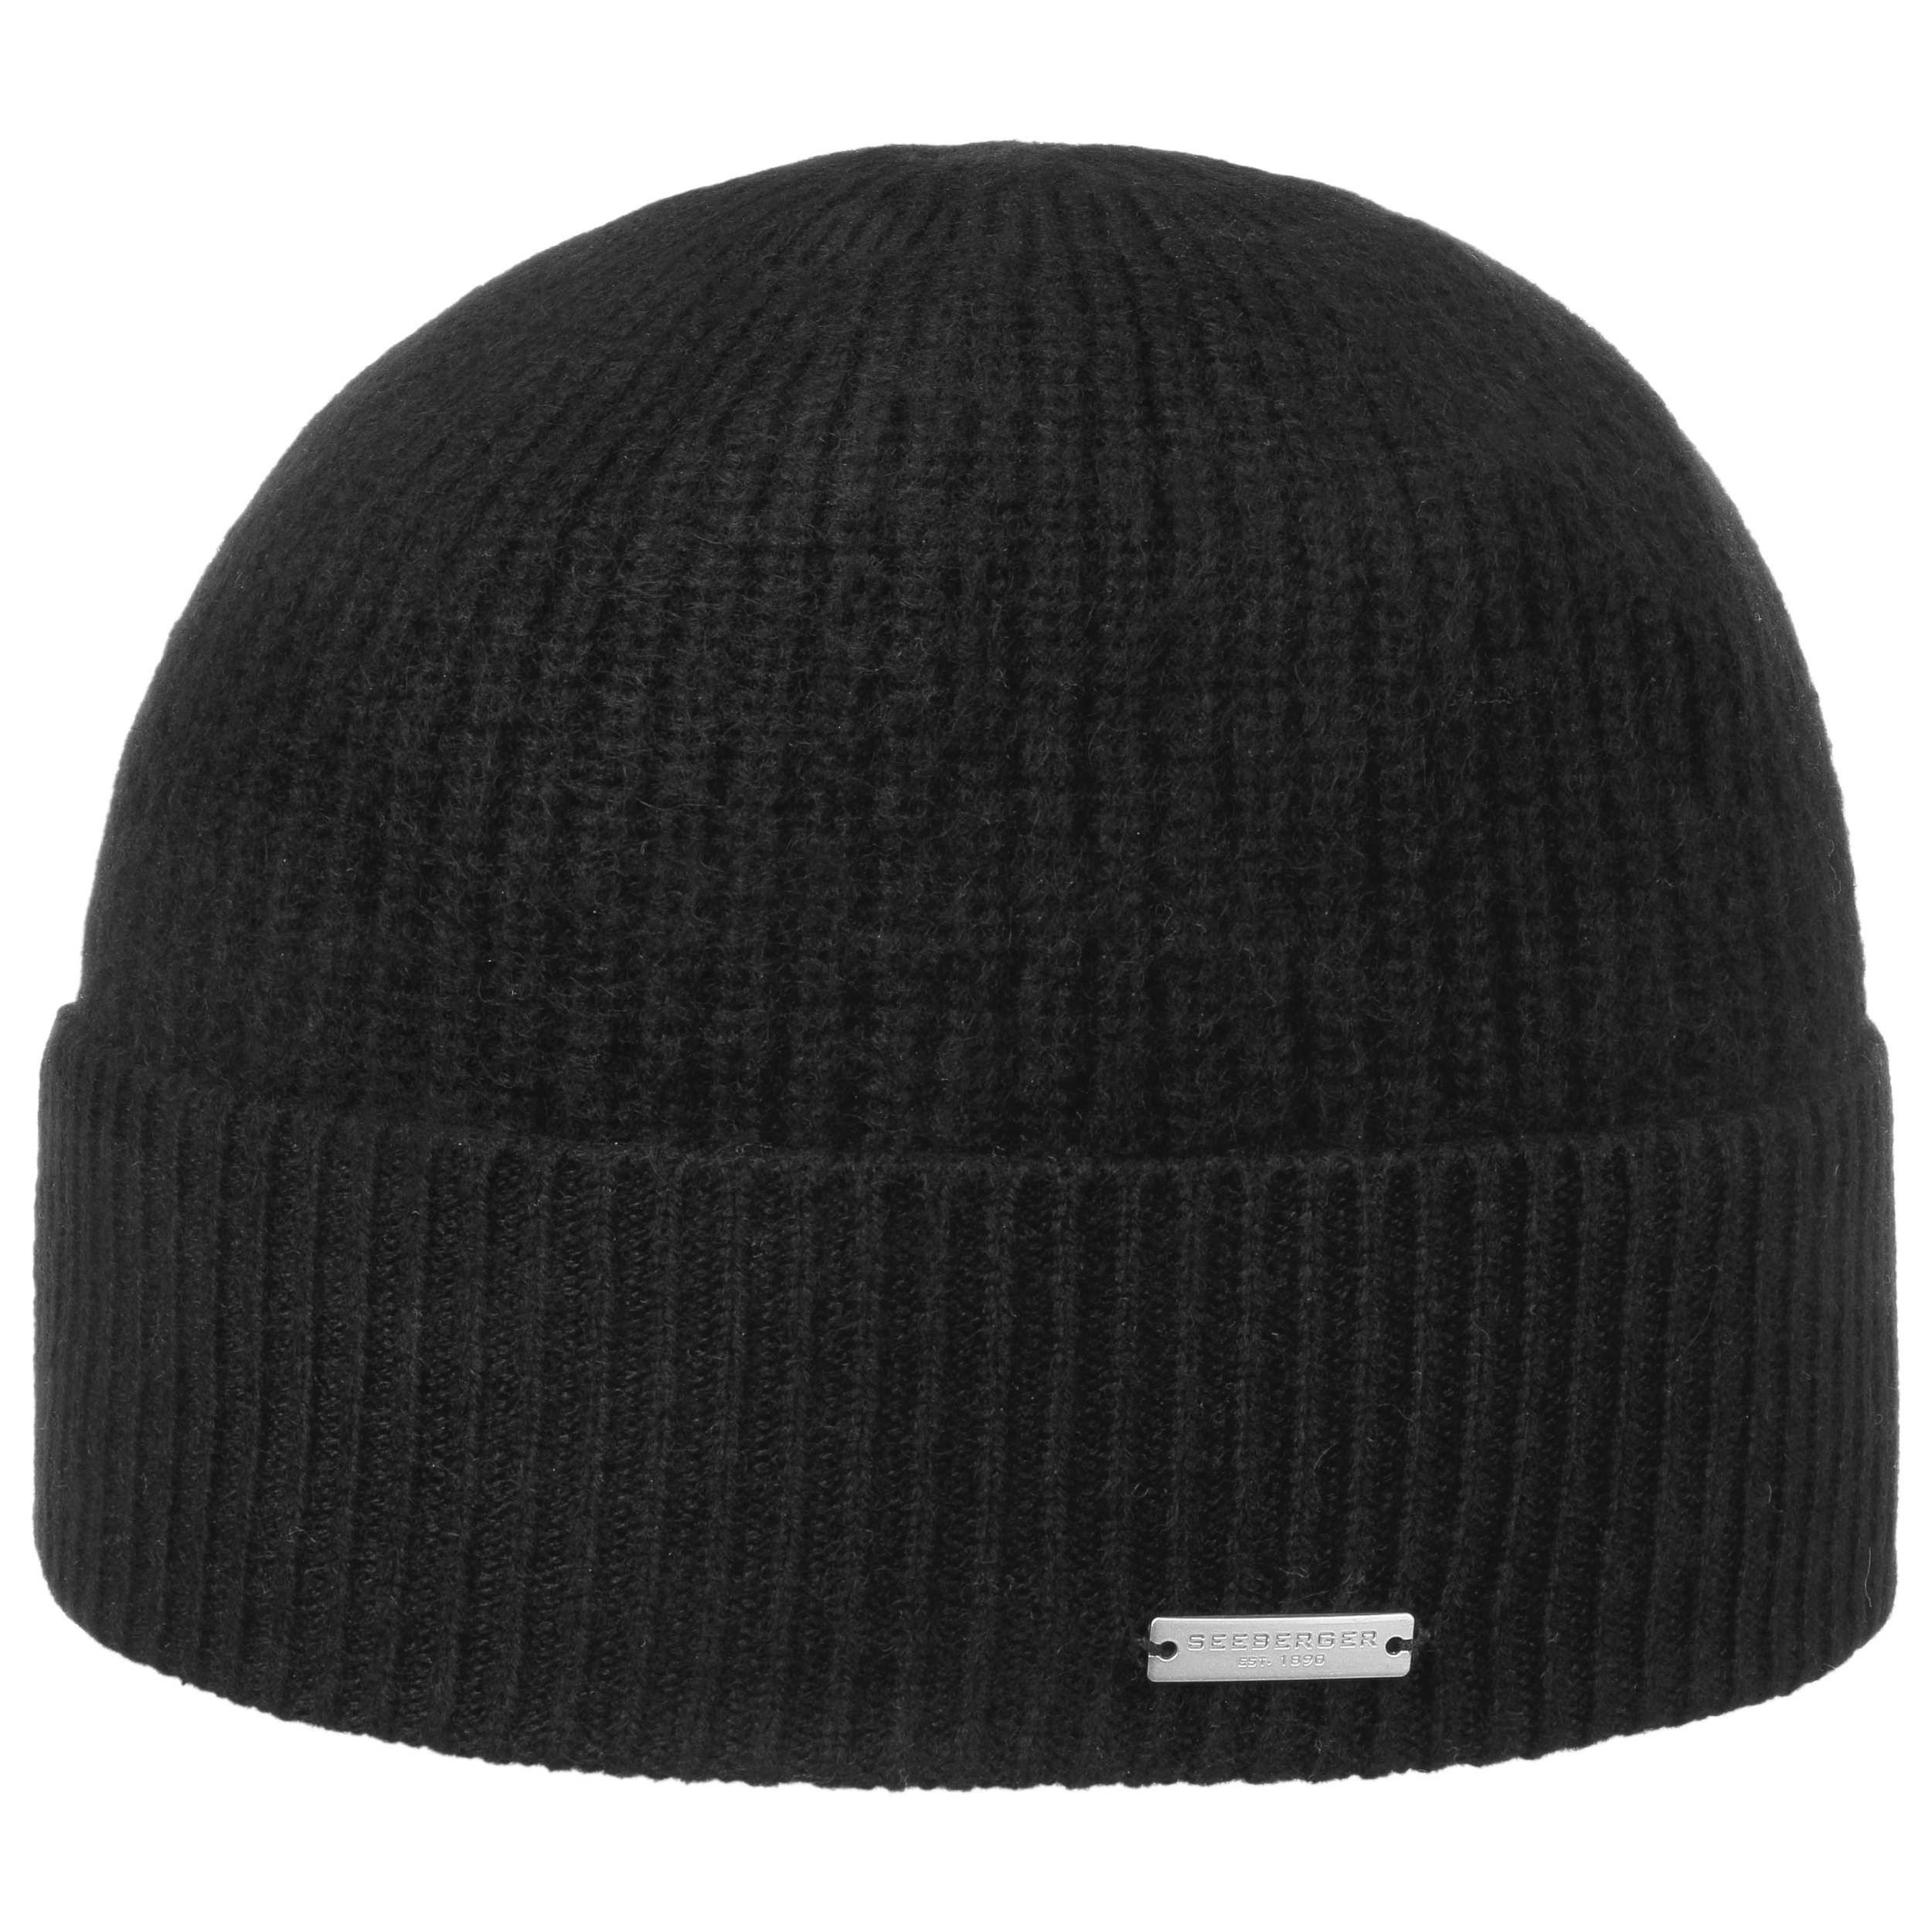 Sporty Cashmere Hat with Cuff by Seeberger, EUR 89,95 --> Hats, caps ...